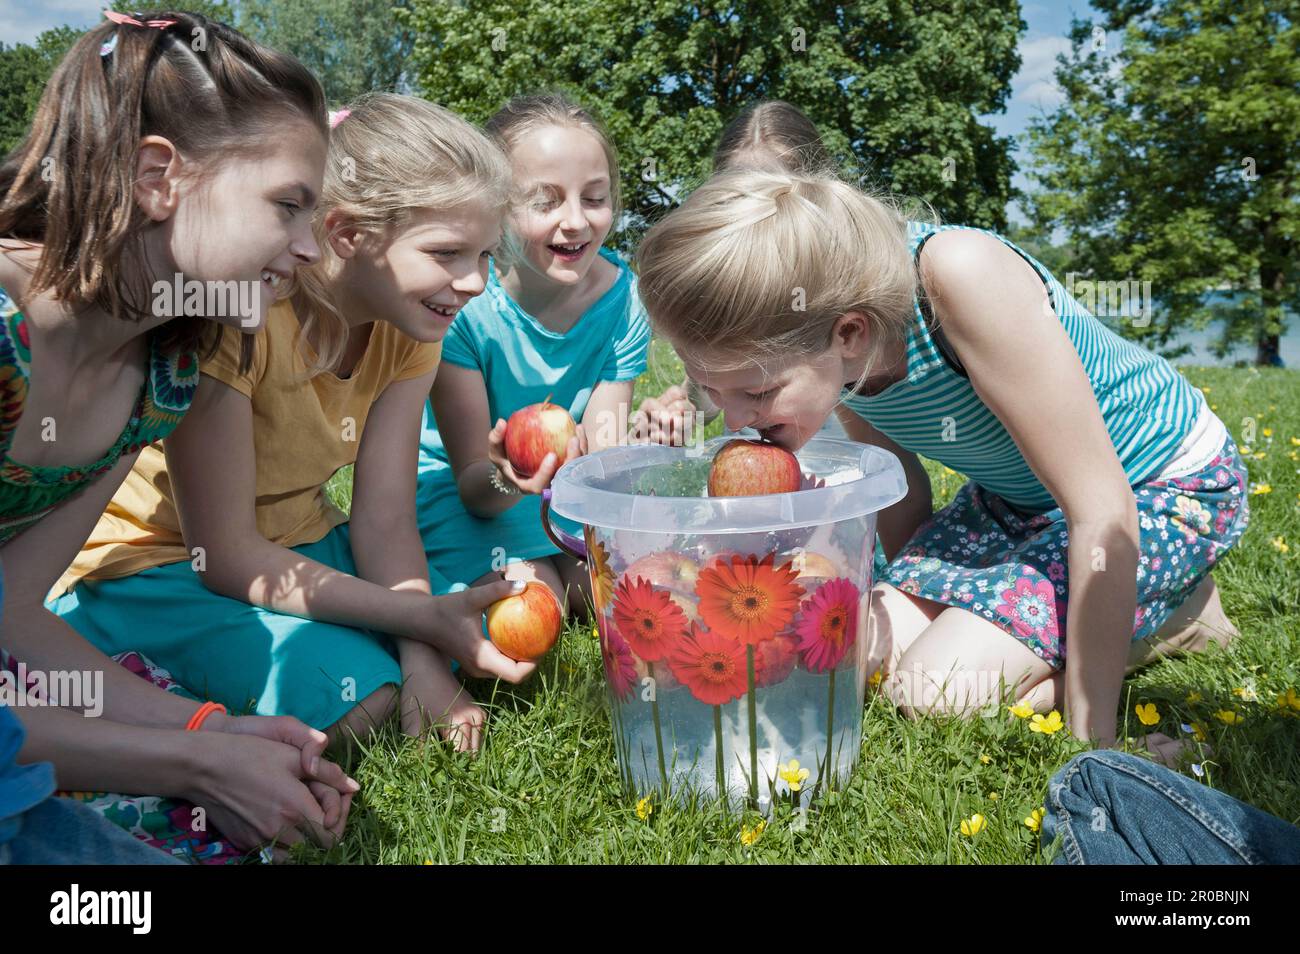 Girl trying to take apple out of a bucket with their mouth, Munich, Bavaria, Germany Stock Photo